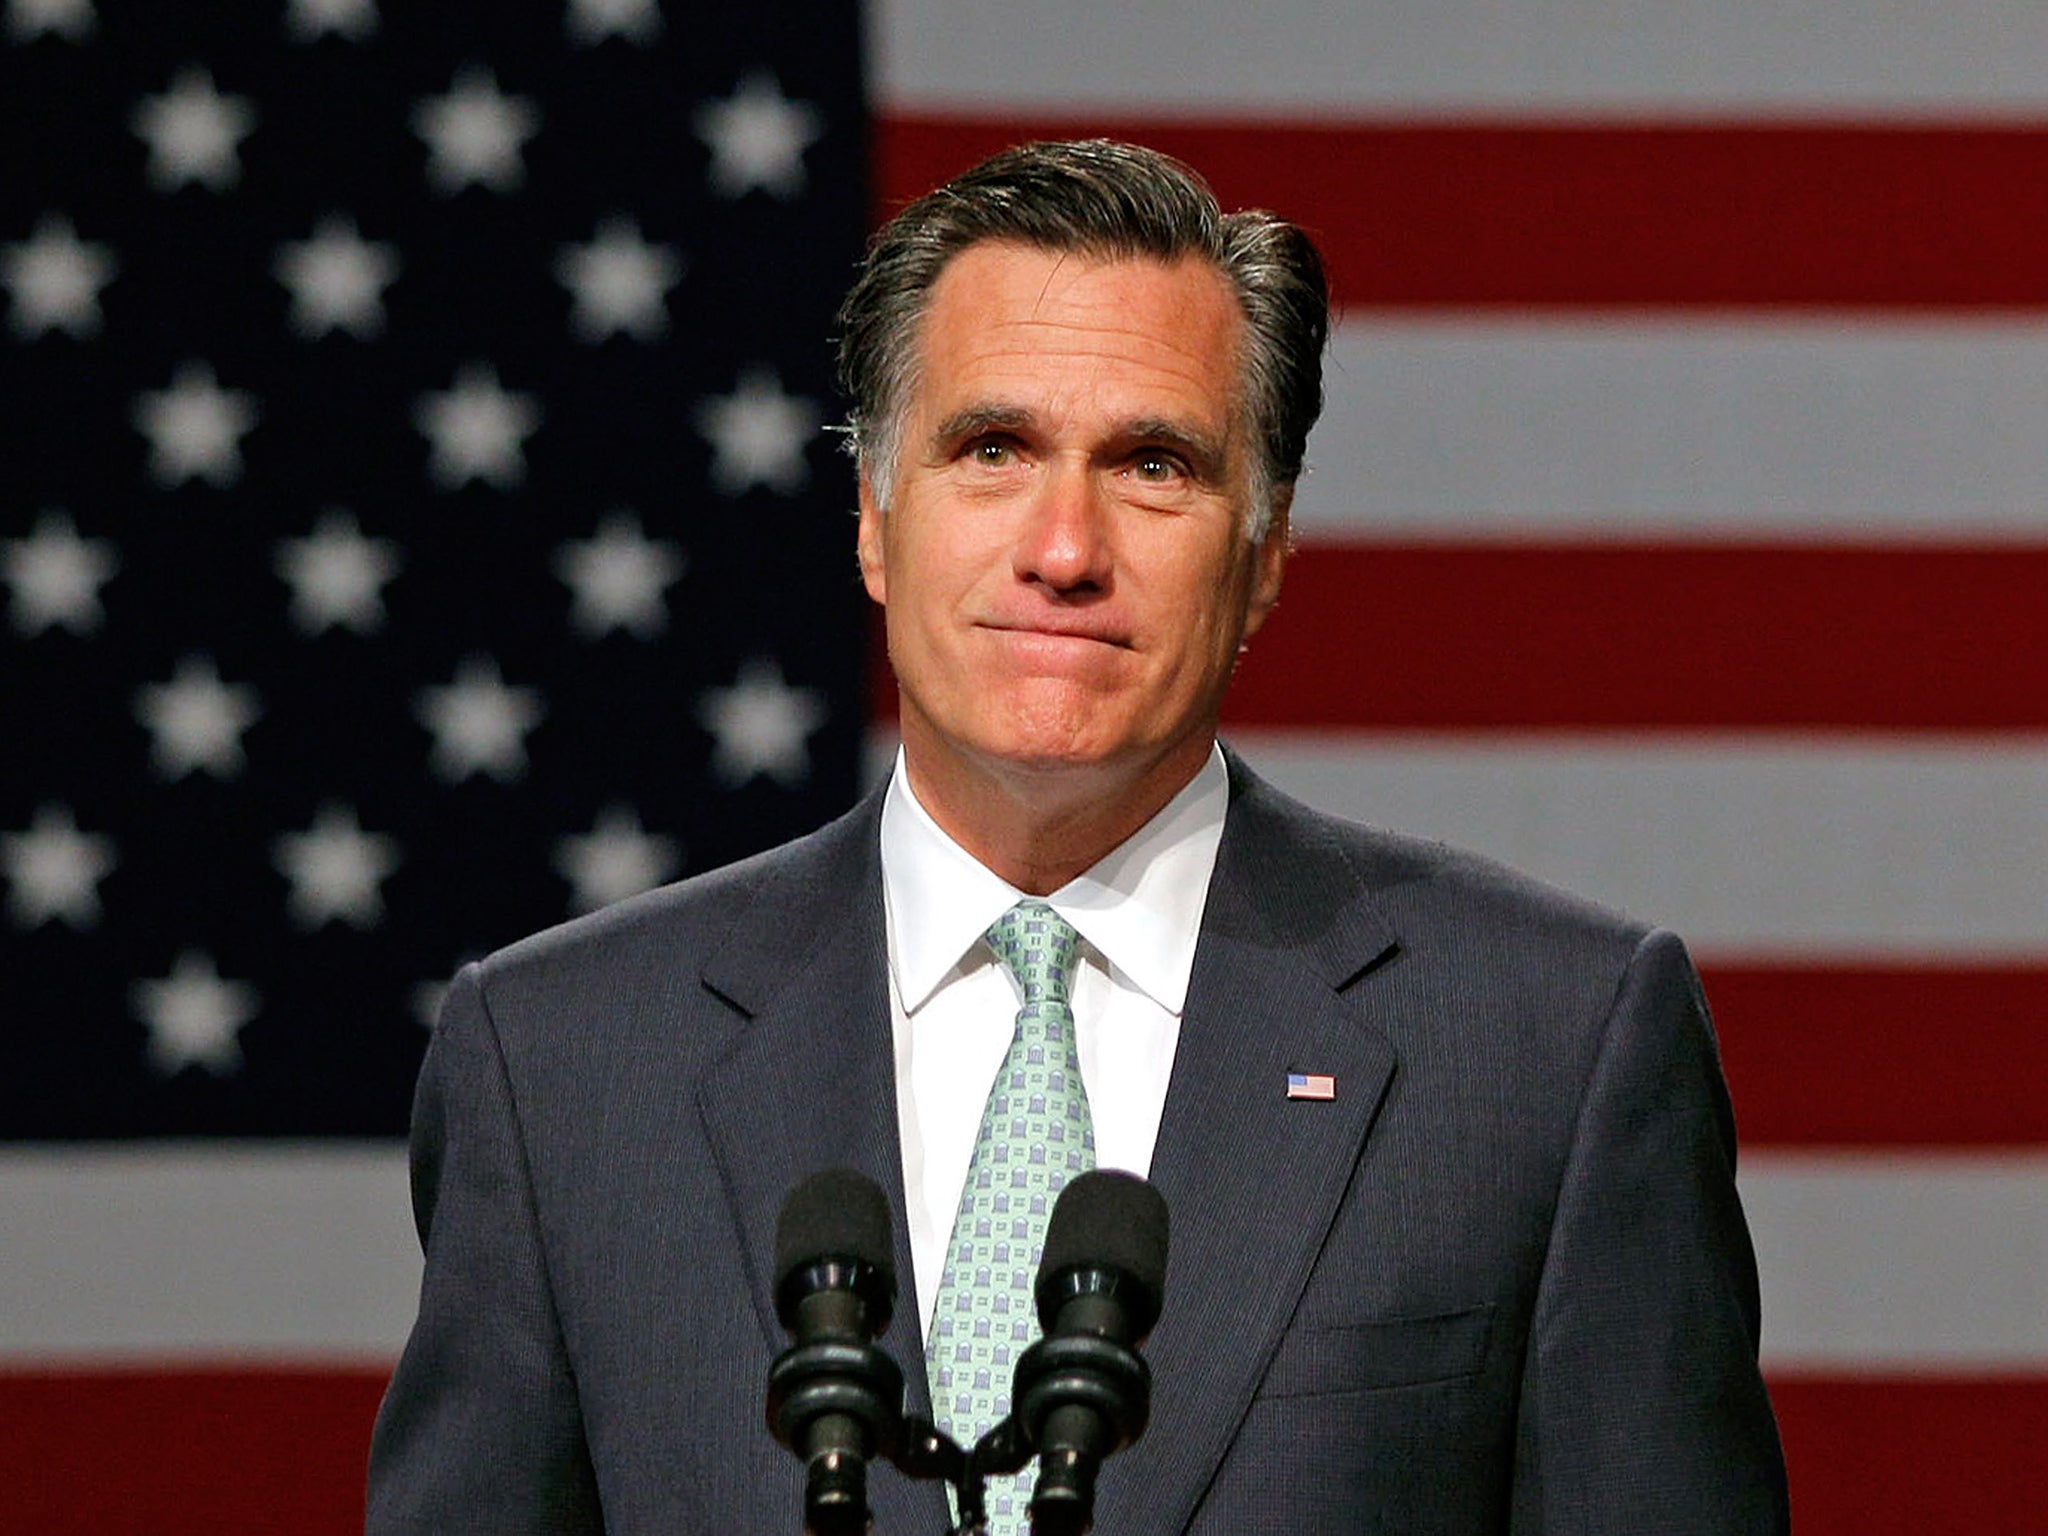 Mr Romney is popular in conservative states where Mr Trump is not